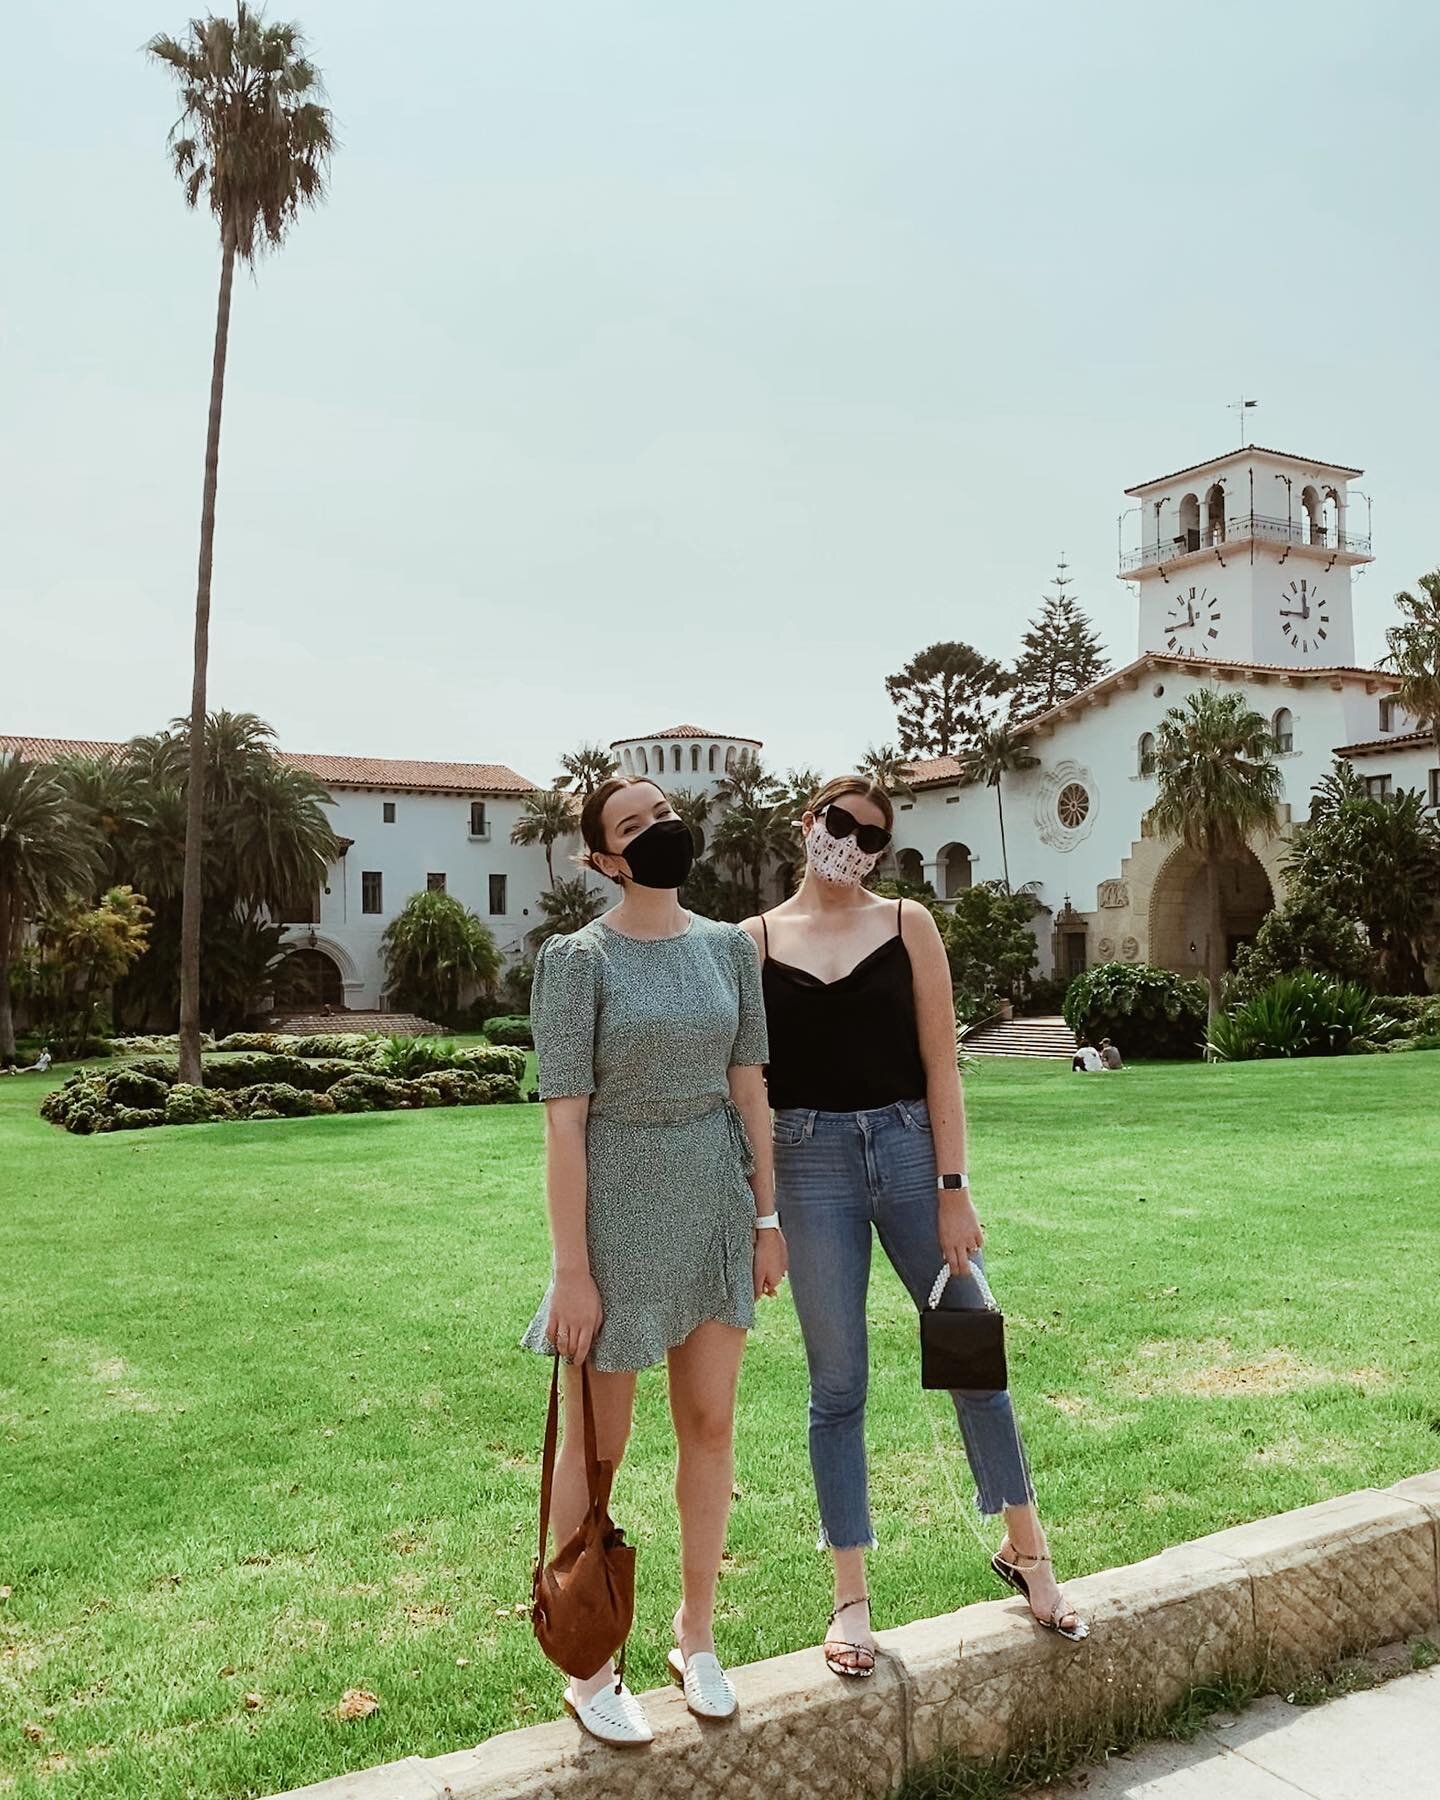 Santa Barbara Weekend Guide 🥂 [Remember to bookmark for future use!]

🌅 Stay: La Playa Inn - A cute boutique hotel in a great location! We found it to be a great value. Honestly though, anywhere close to Cabrillo Blvd + State Street will put you wi